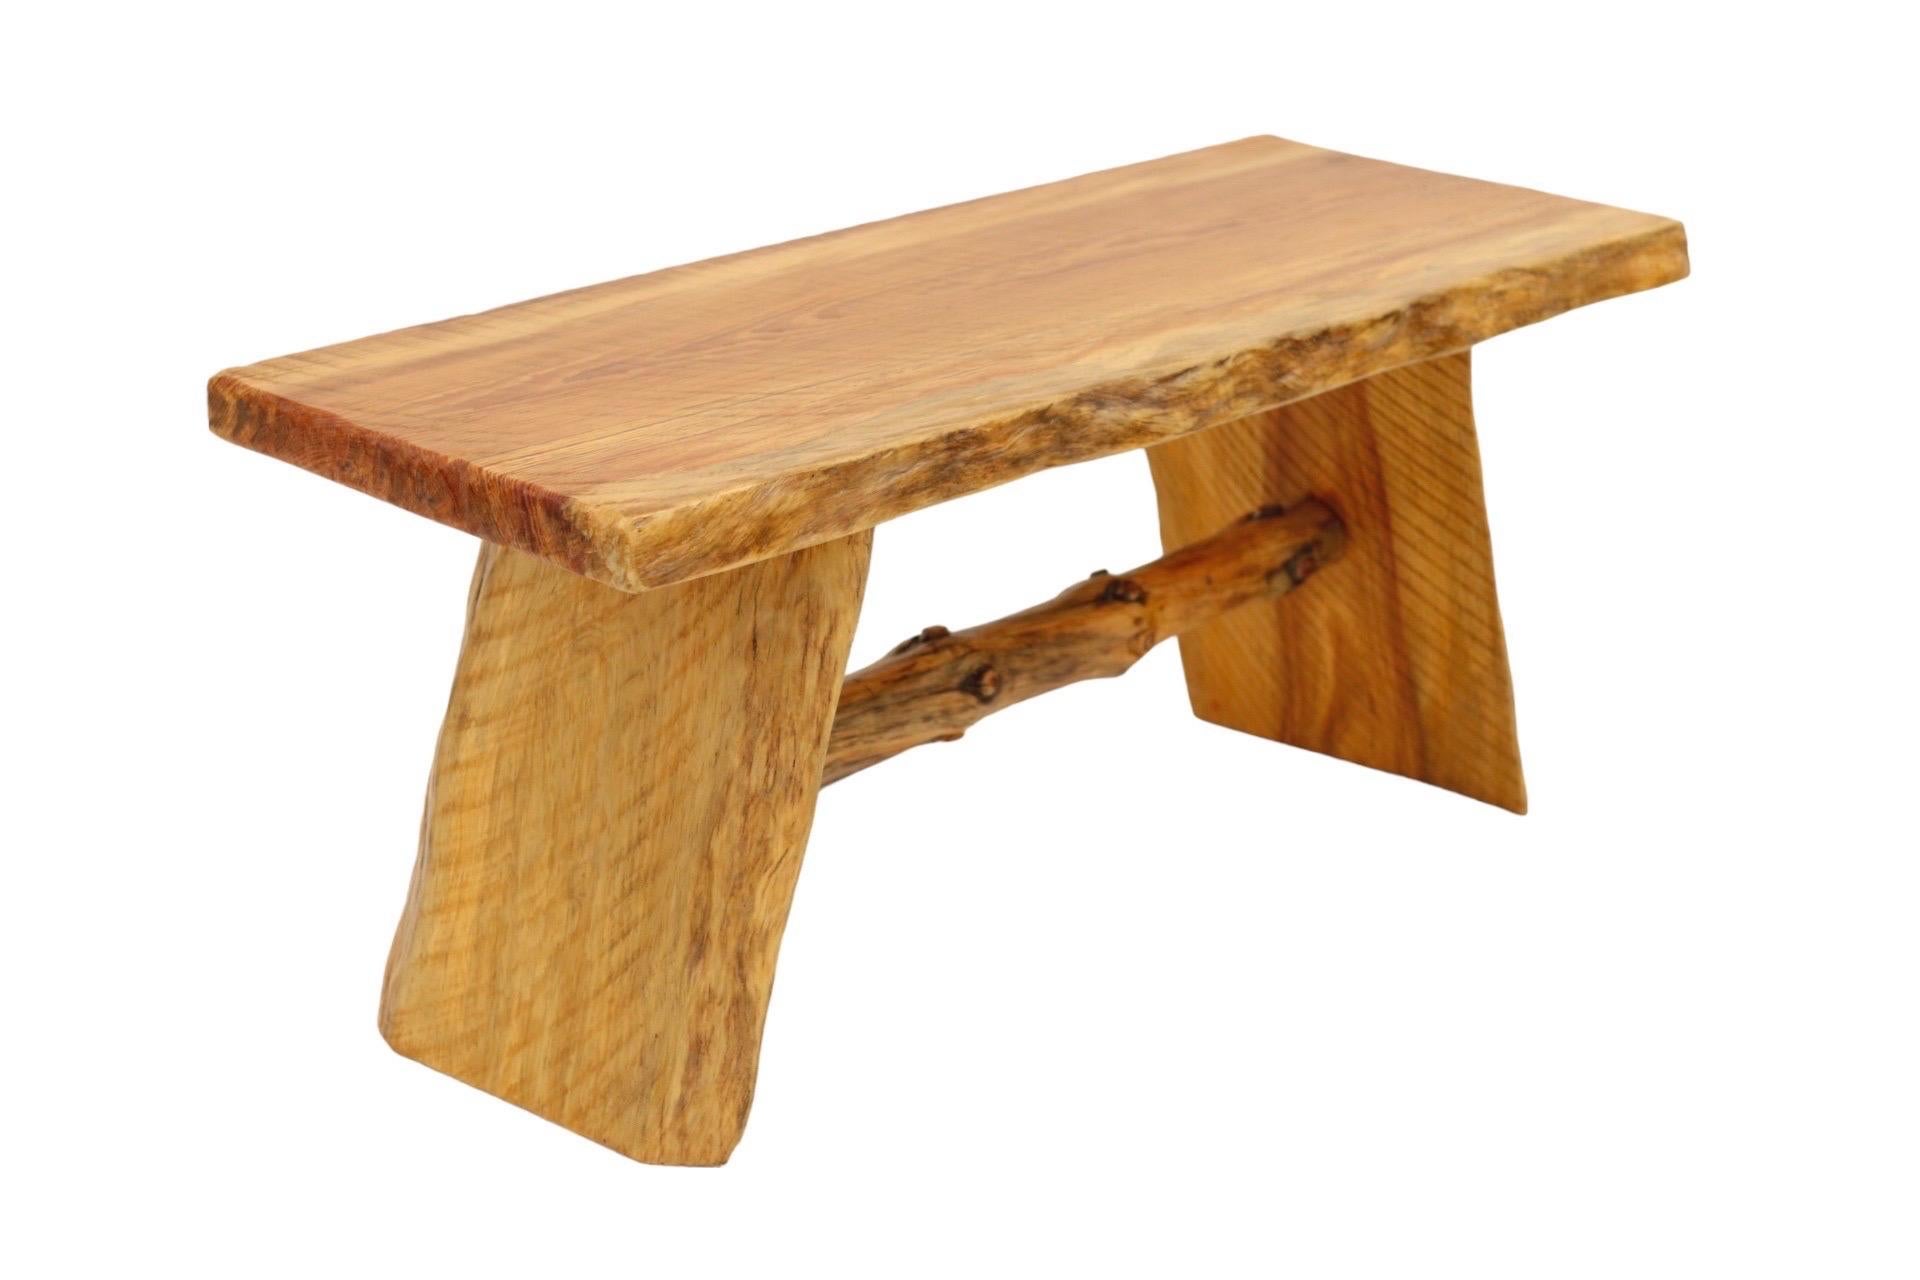 Rustic Live Edge Pine Bench In Good Condition For Sale In Bradenton, FL